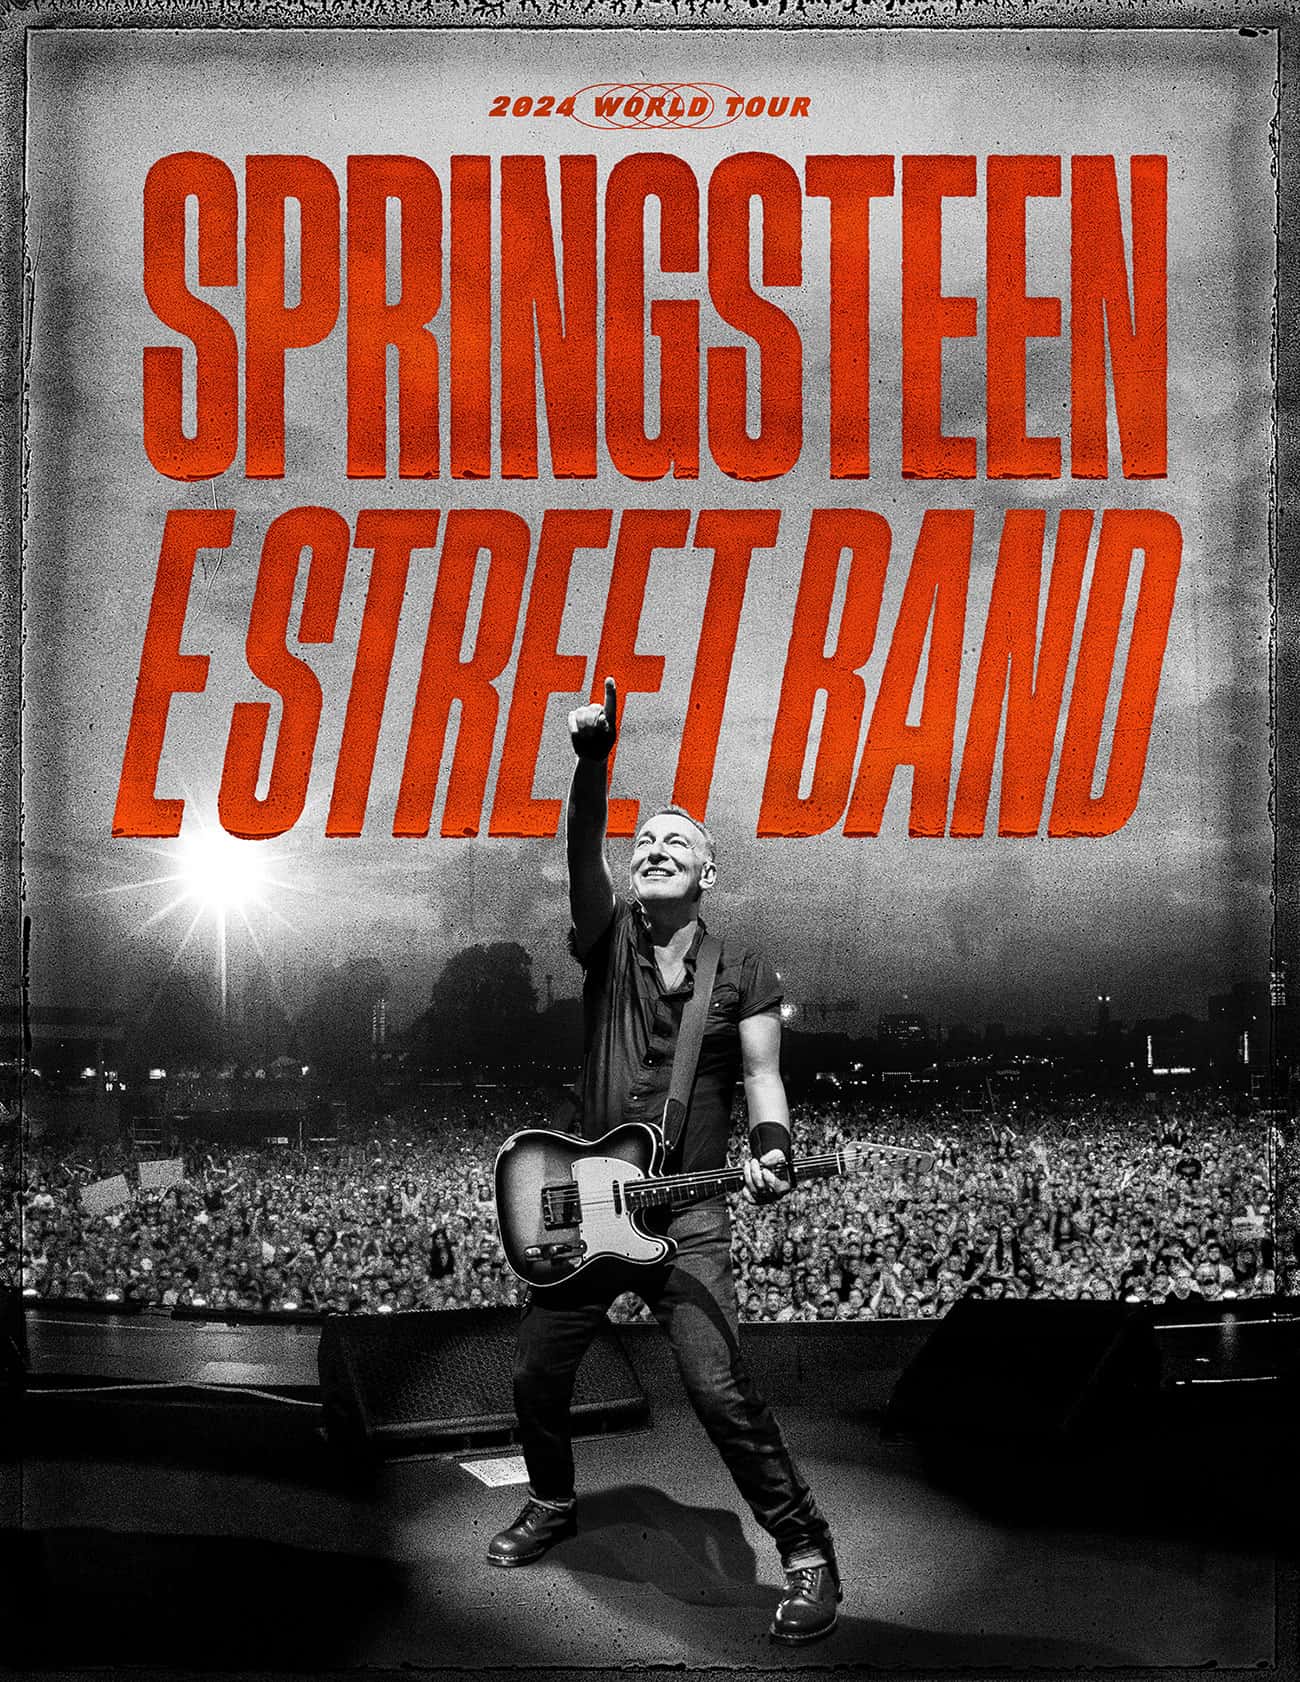 Bruce Springsteen Documentary To Premiere On Hulu And Disney+